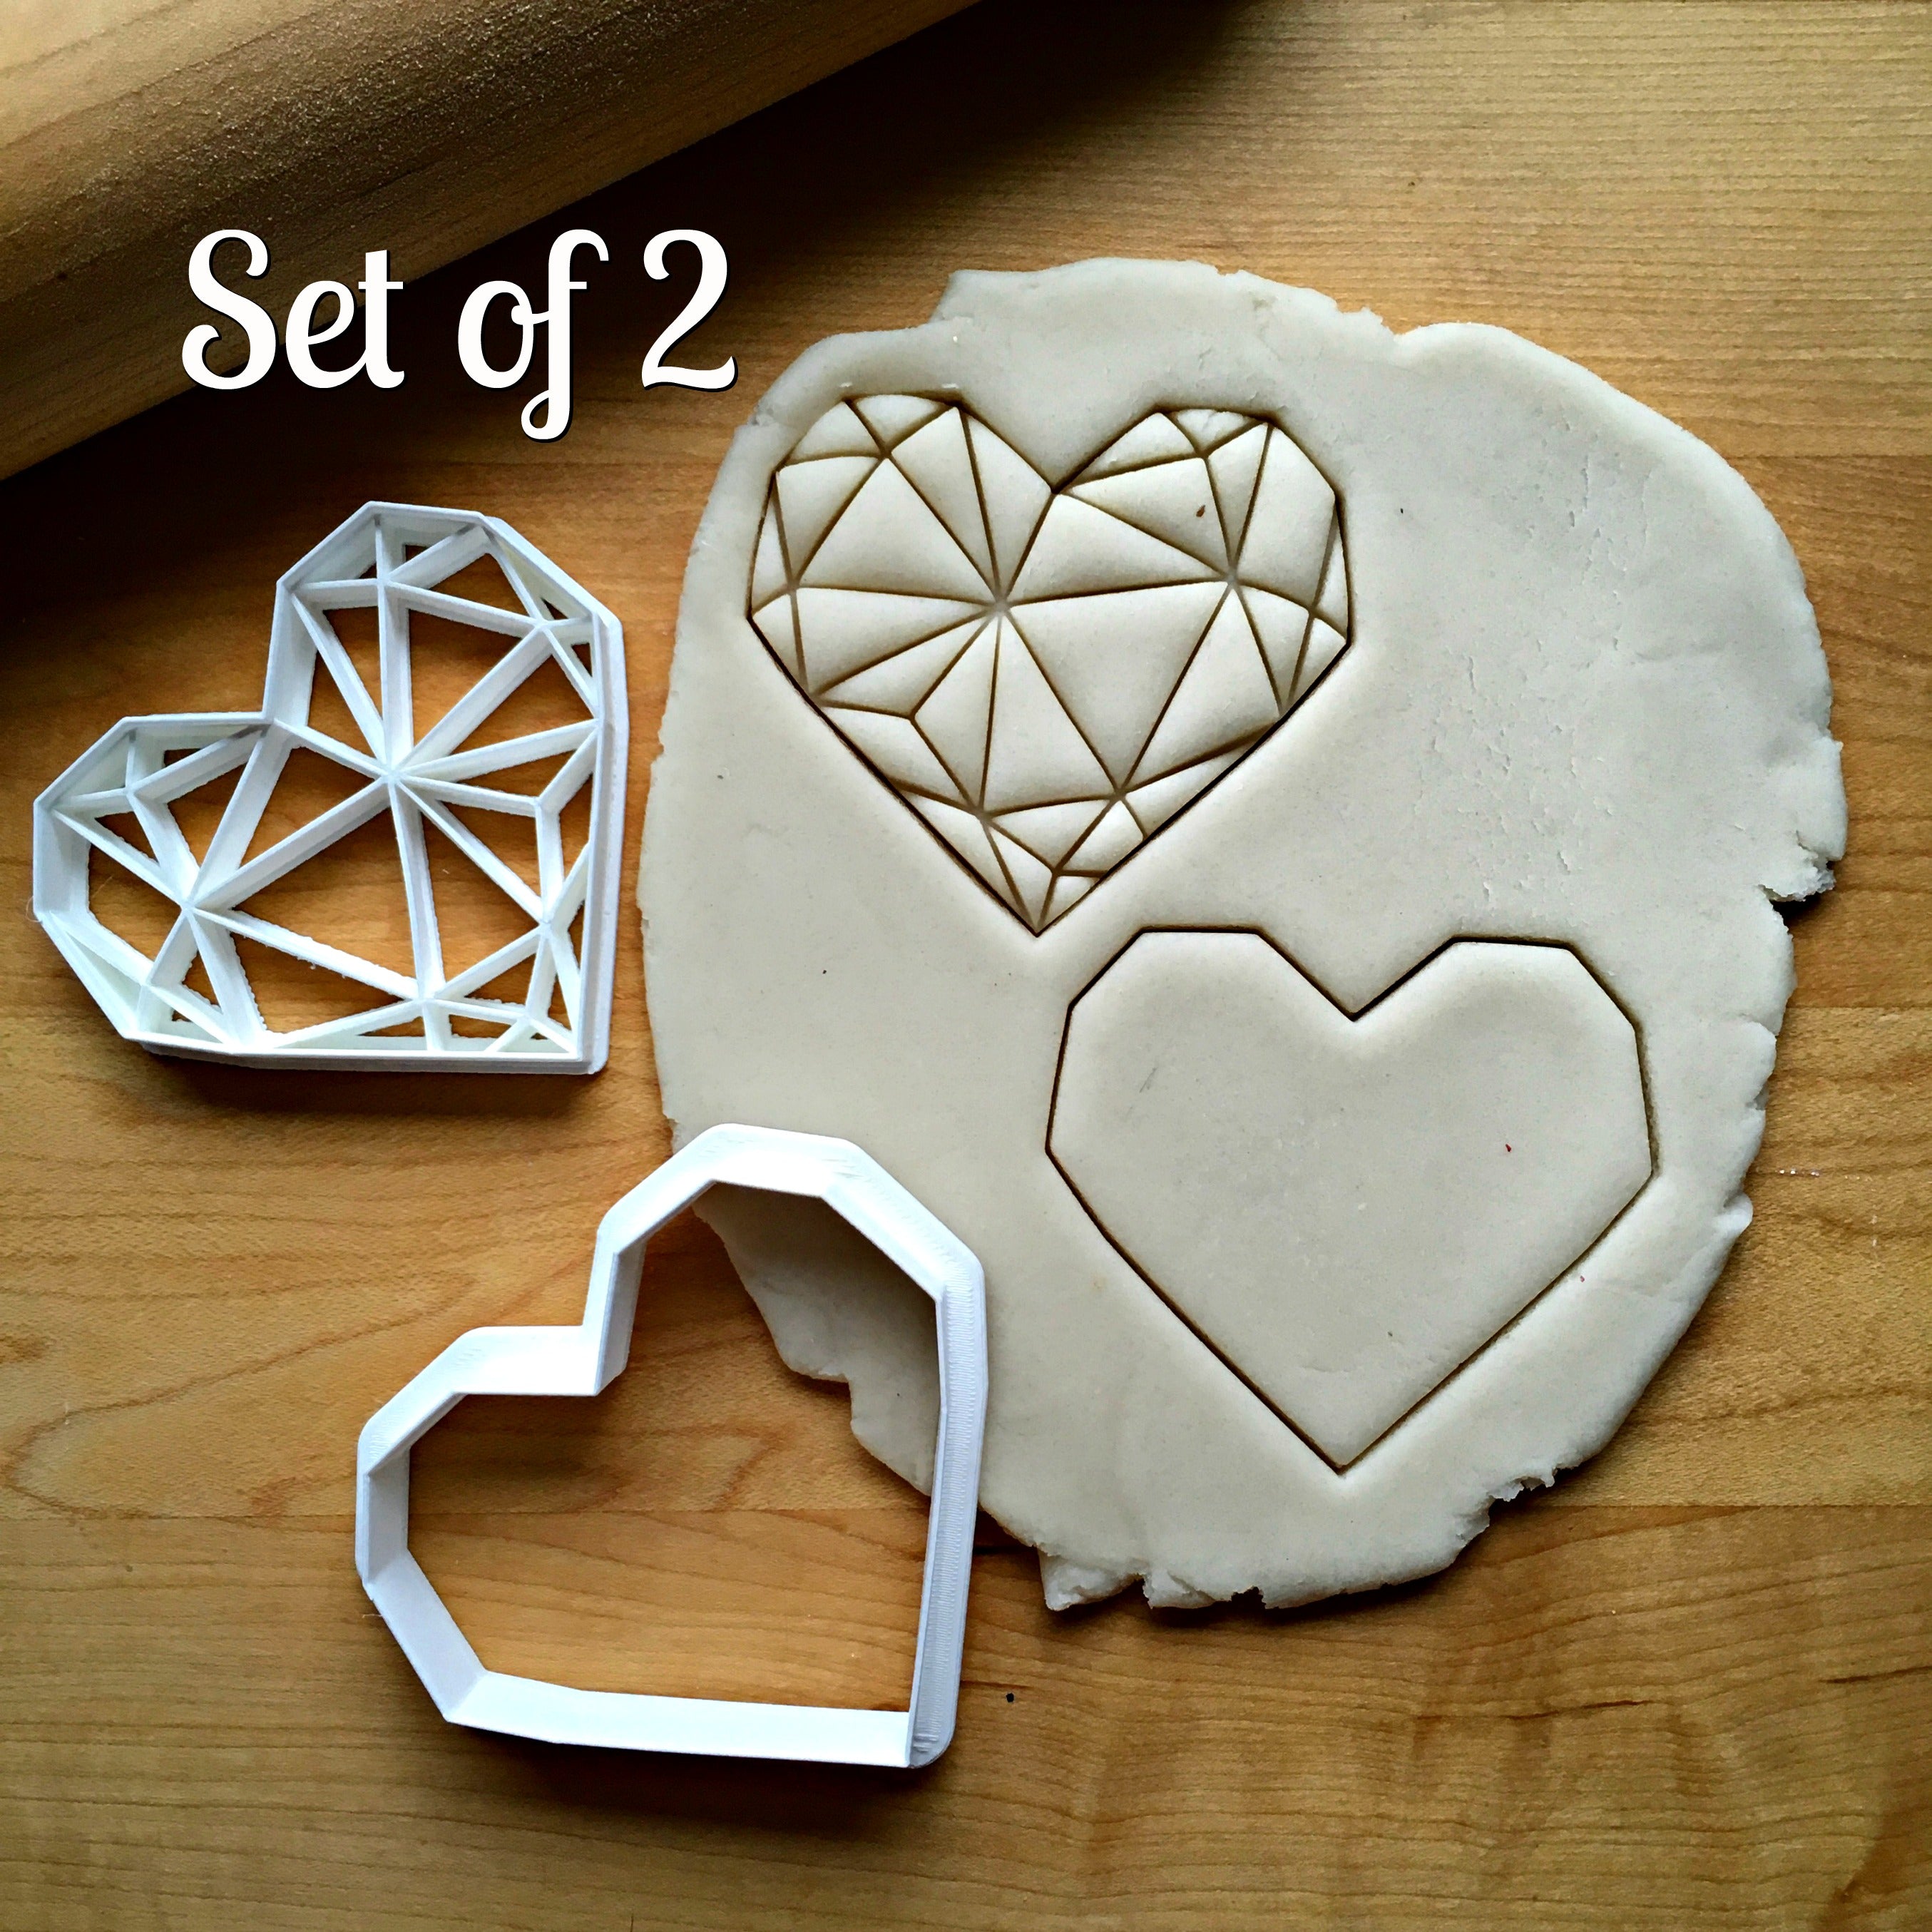 Set of 2 Geometric Heart Cookie Cutters/Dishwasher Safe